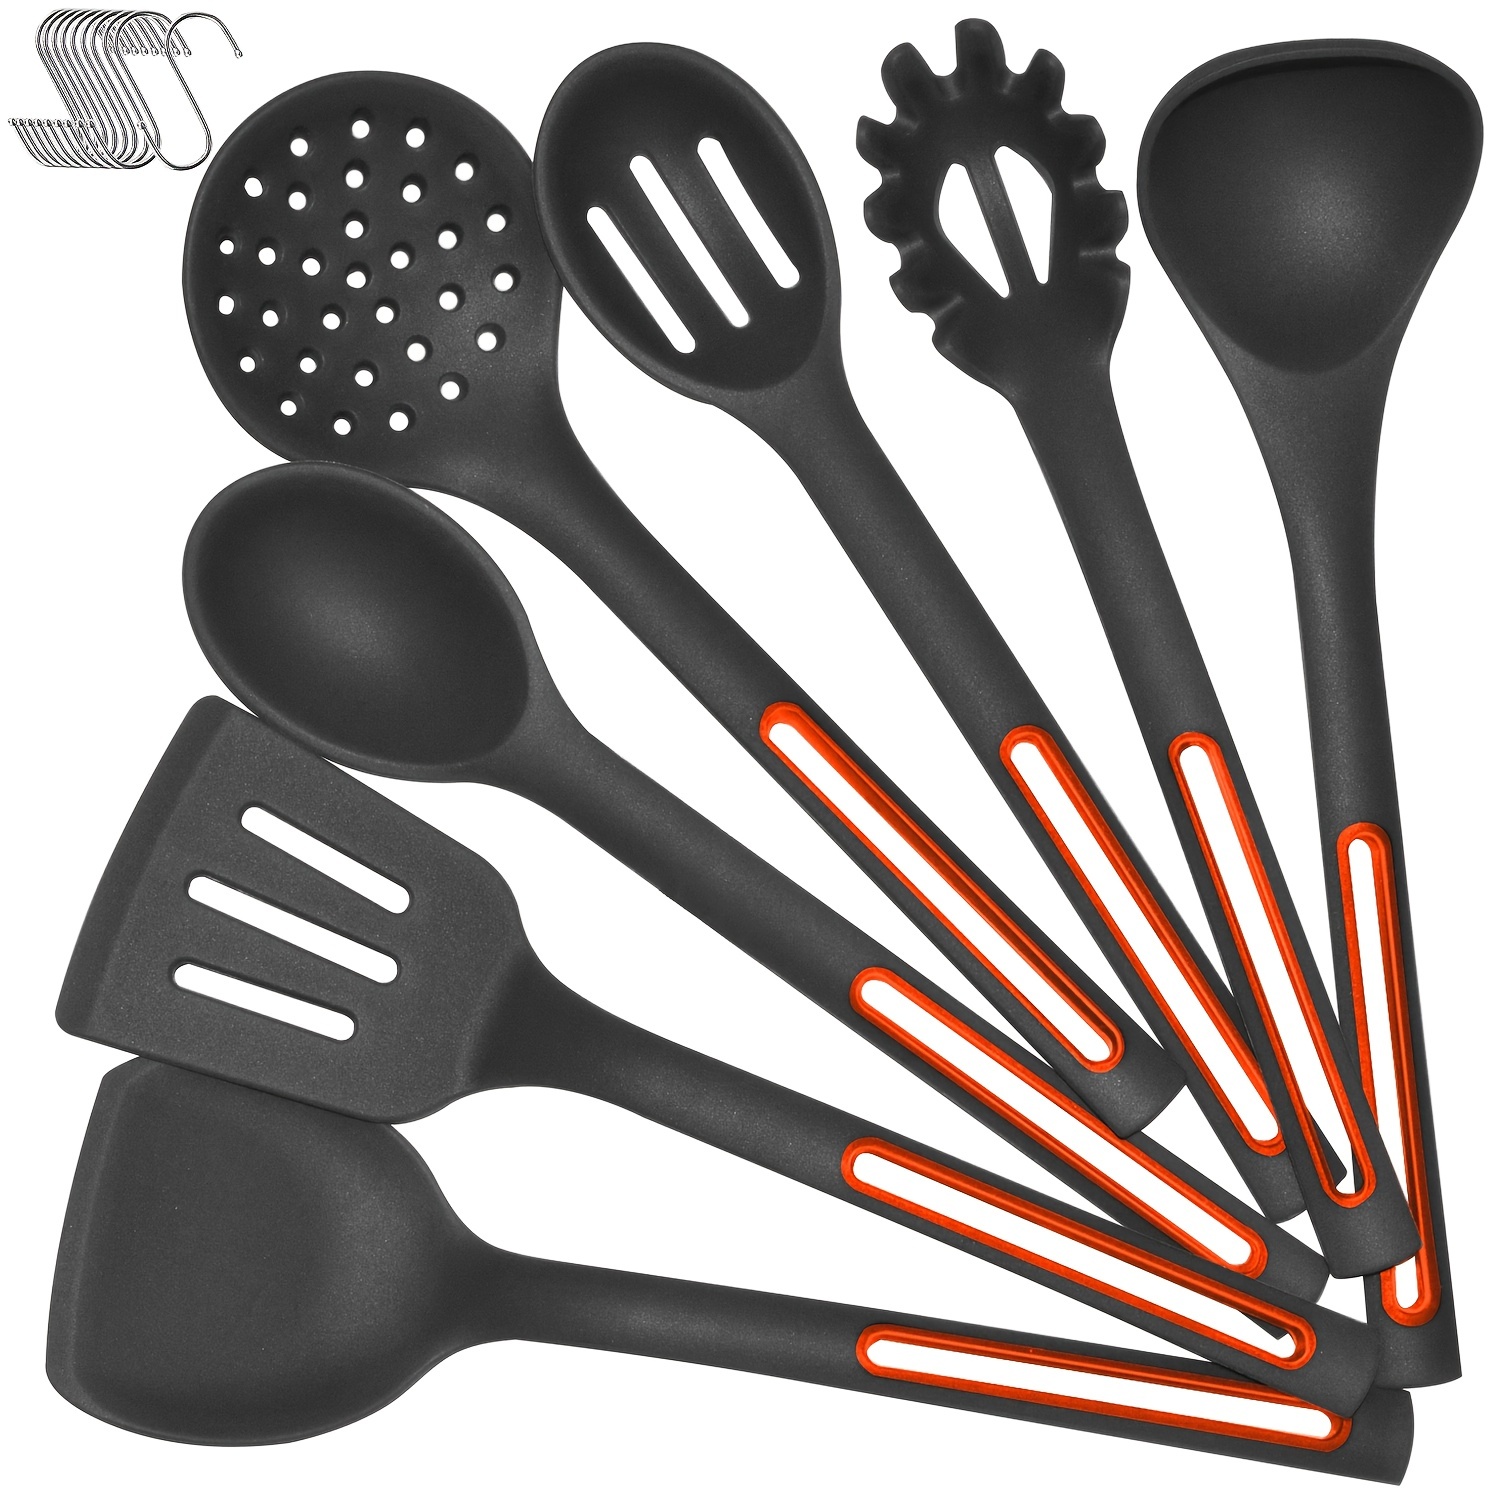 Large Silicone Cooking Utensils - Heat Resistant Kitchen Utensil Set with Wooden Handles, Spatula,Turner, Slotted Spoon, Pasta Server, Kitchen Gadgets